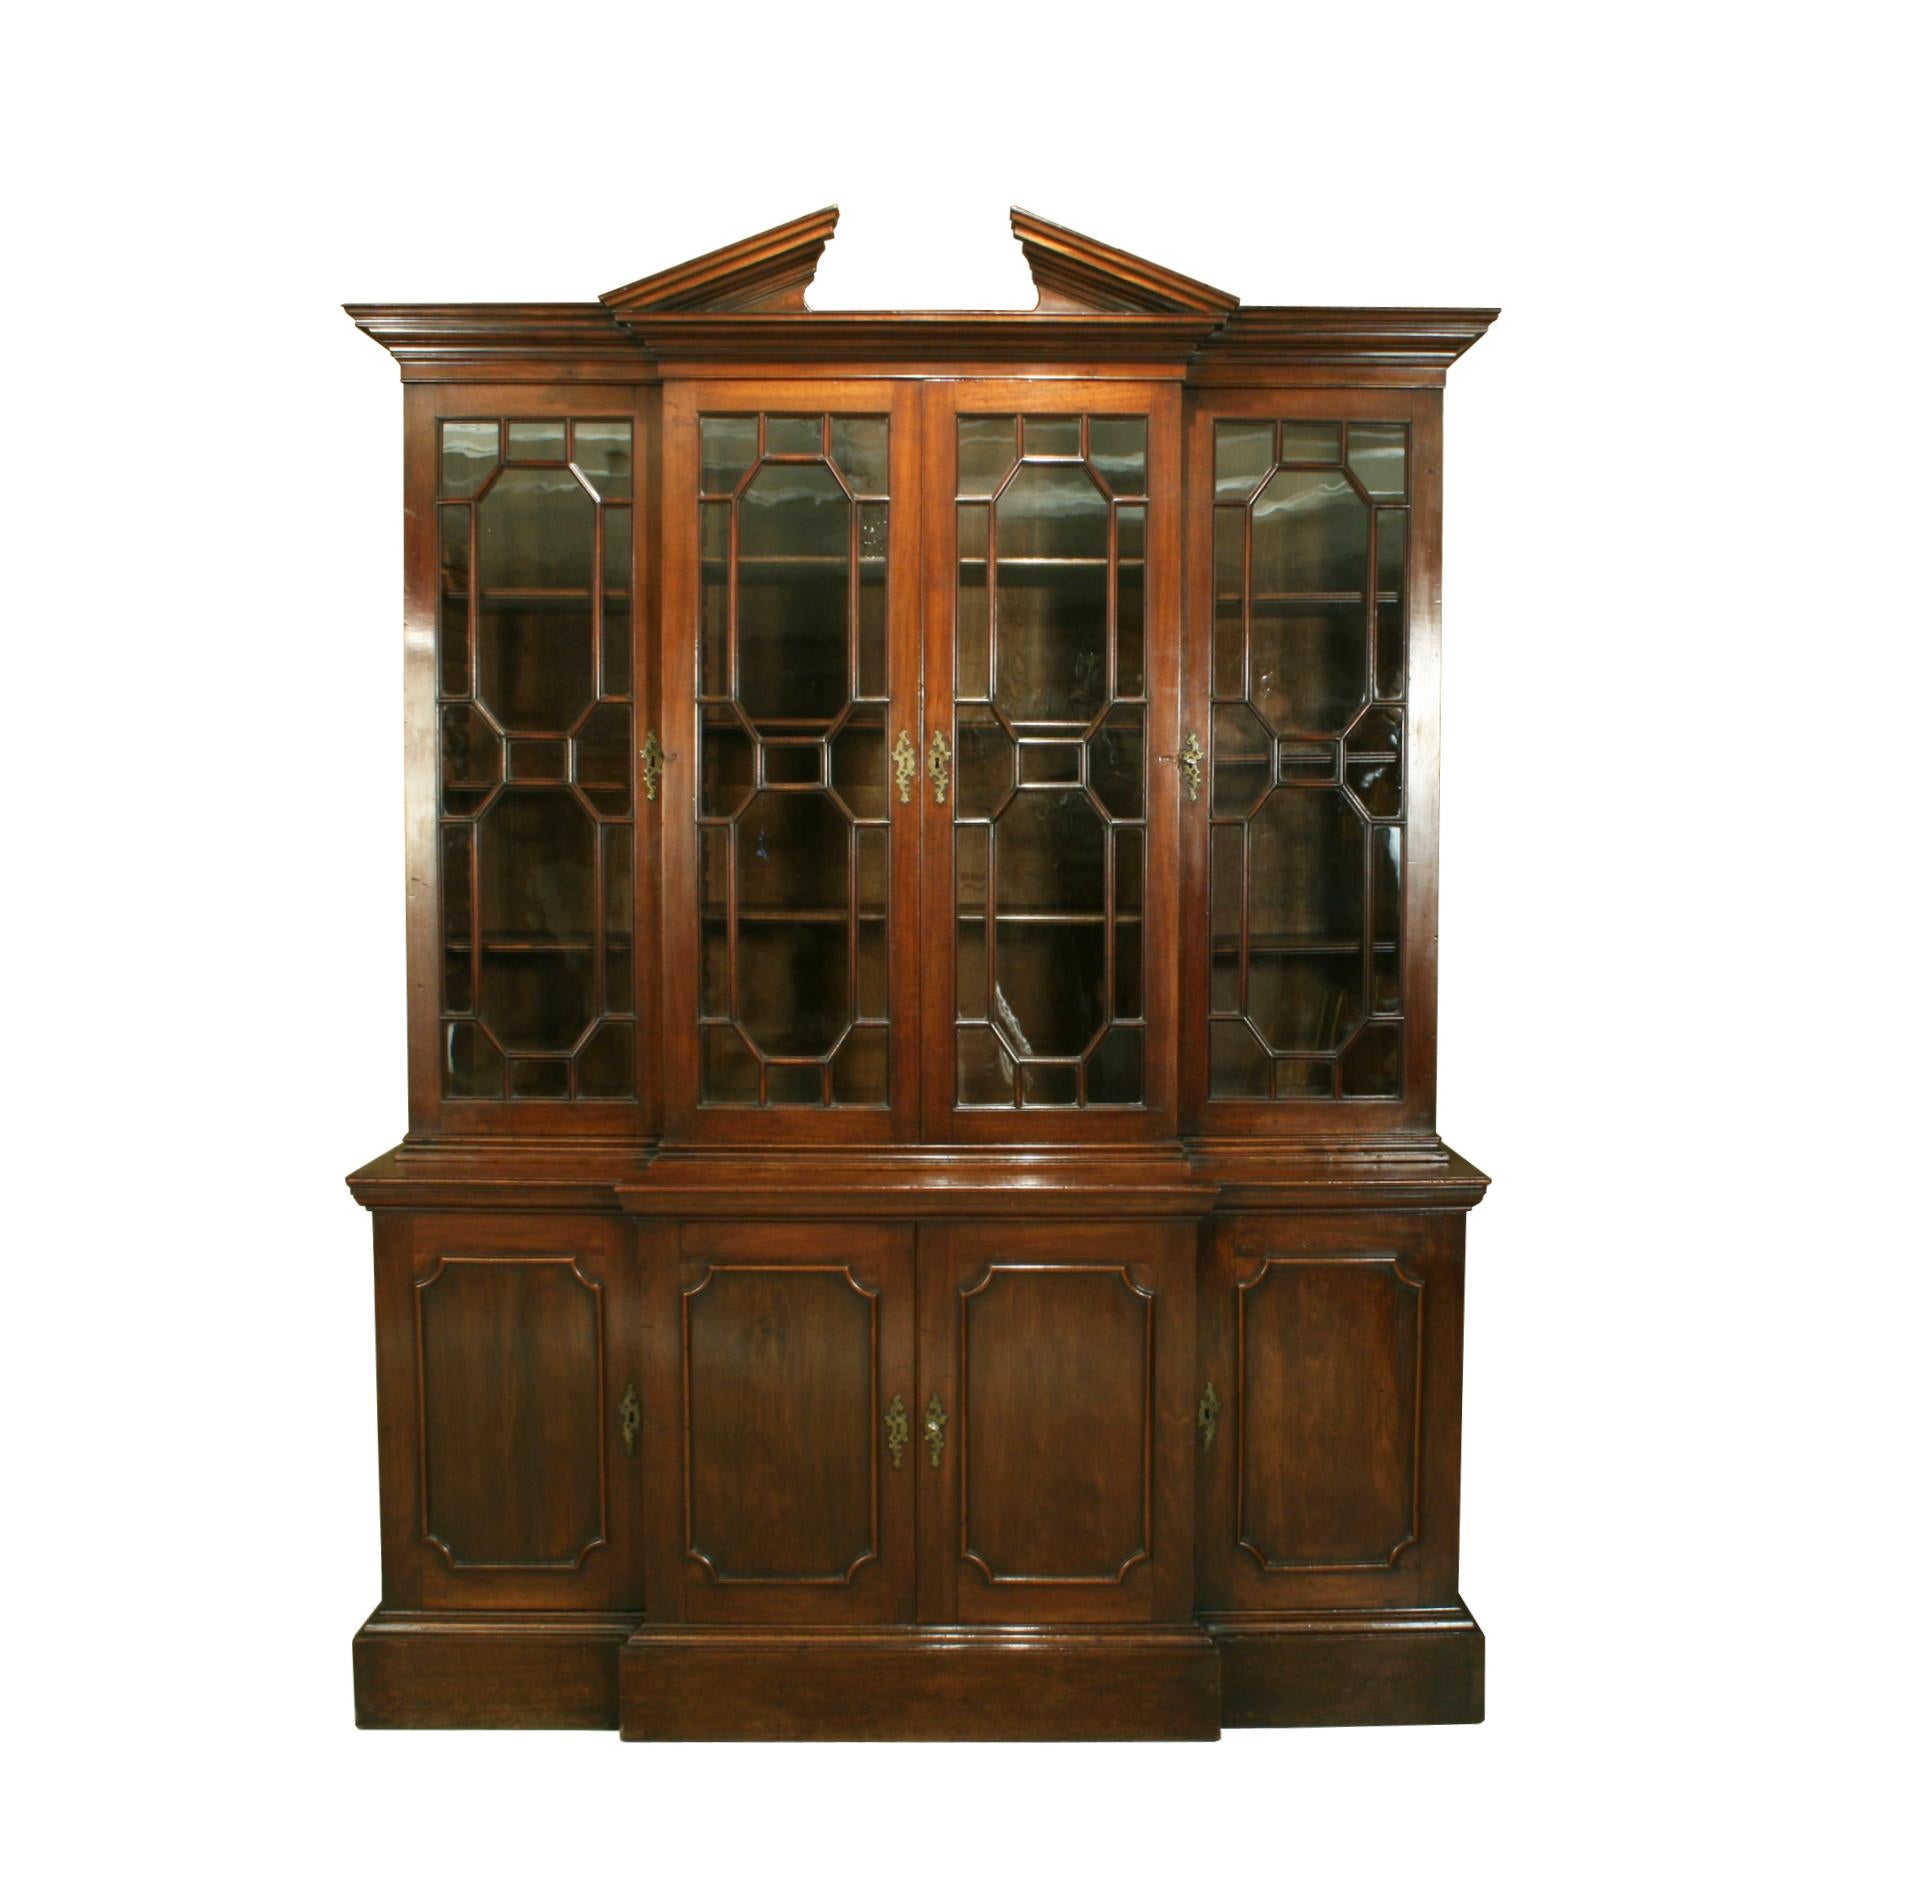 A wonderful Georgian mahogany breakfront bookcase of small proportions with astragal glazed doors and broken architectural pediment cornice, 18th century. The upper part with original adjustable shelves. The base fitted with some drawers and